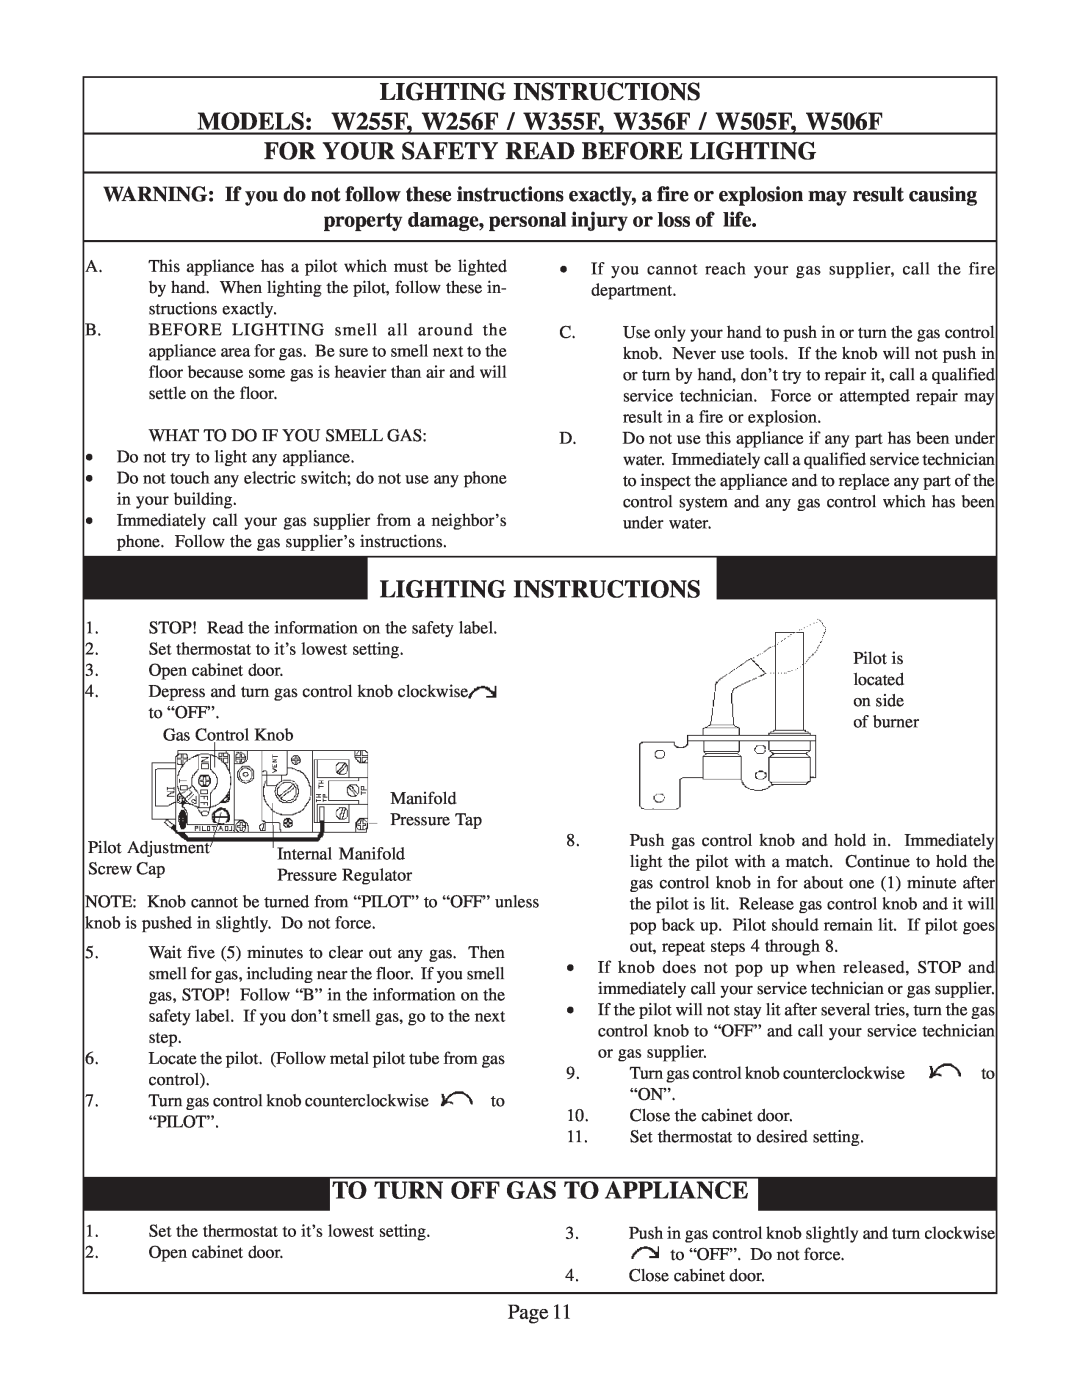 Louisville Tin and Stove W255F Lighting Instructions, For Your Safety Read Before Lighting, To Turn Off Gas To Appliance 